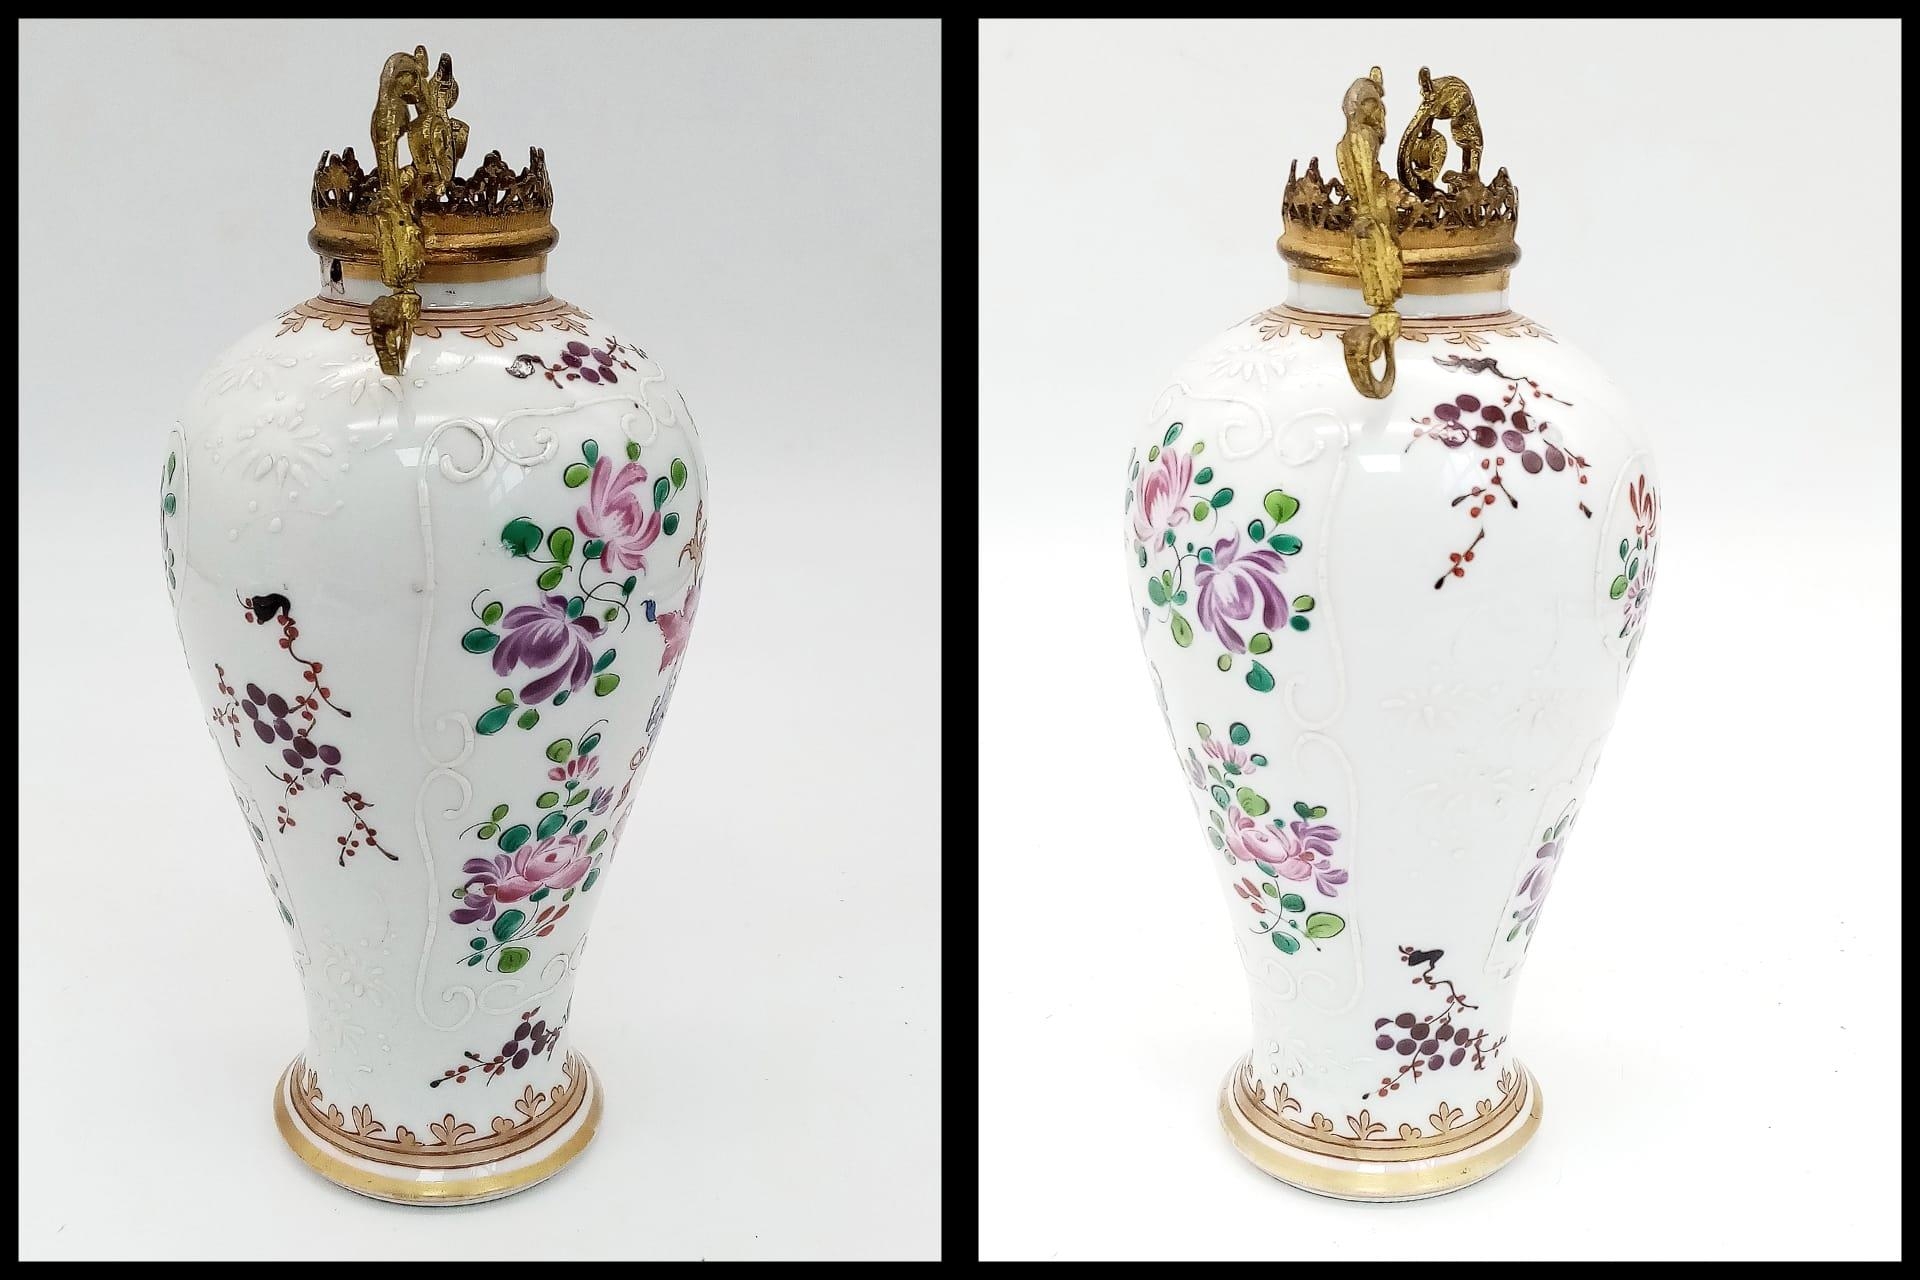 An Antique Porcelain Chinese Vase with Hand-Painted Armorial and Floral Decoration. Marks on base. - Image 3 of 5